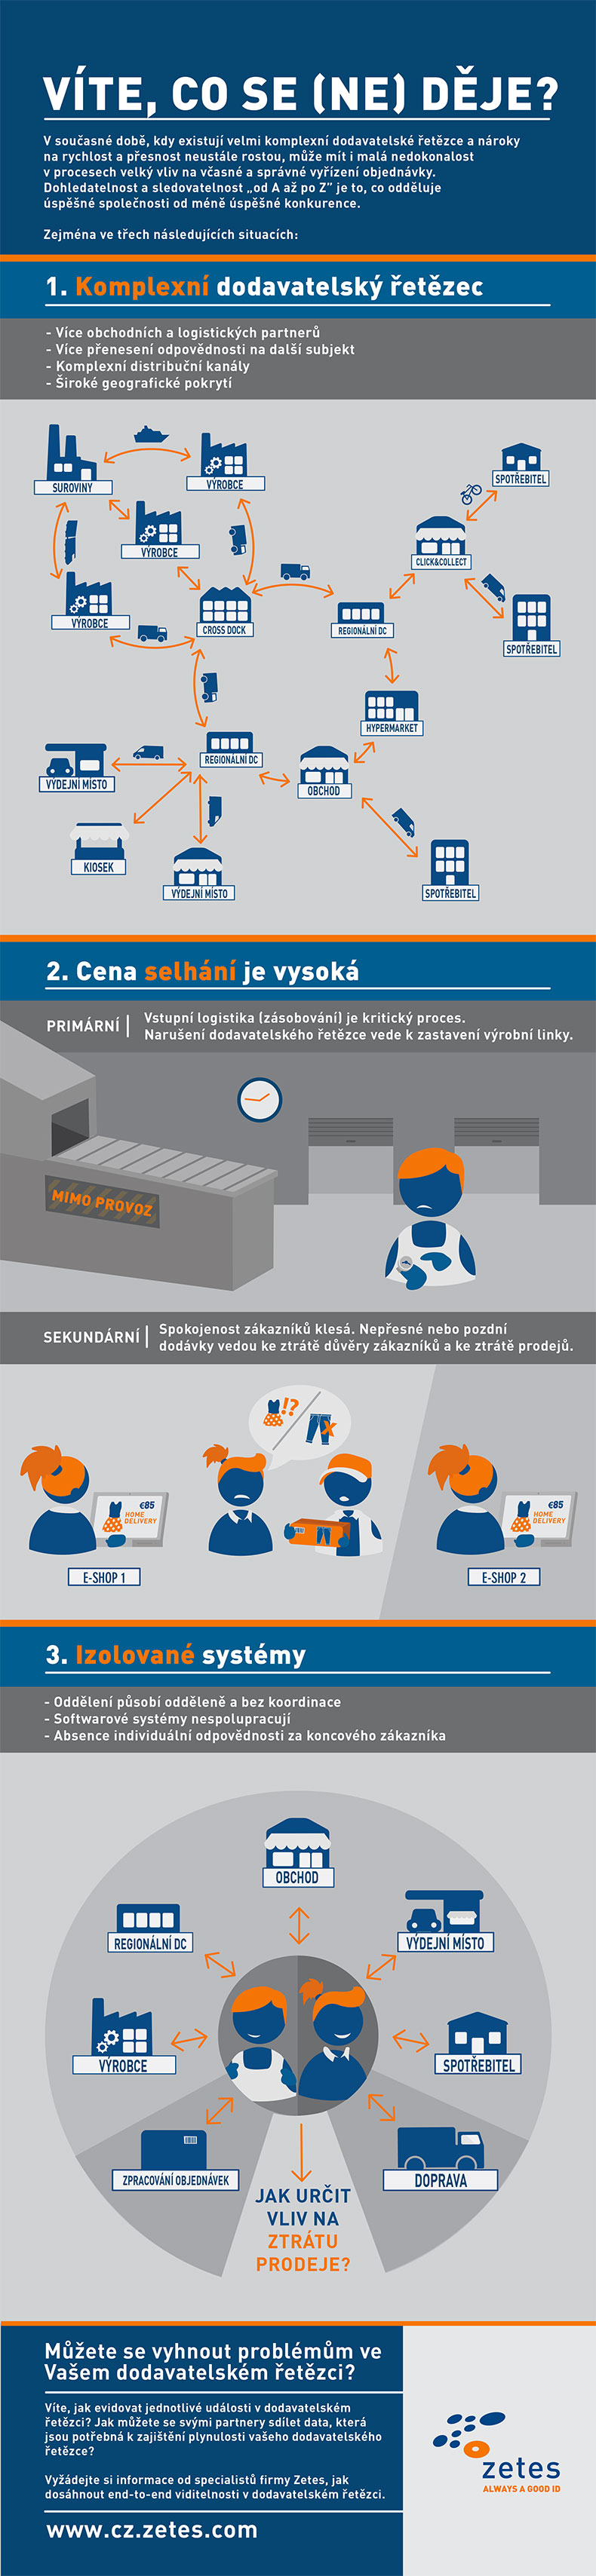 Supply chain visibility infographic